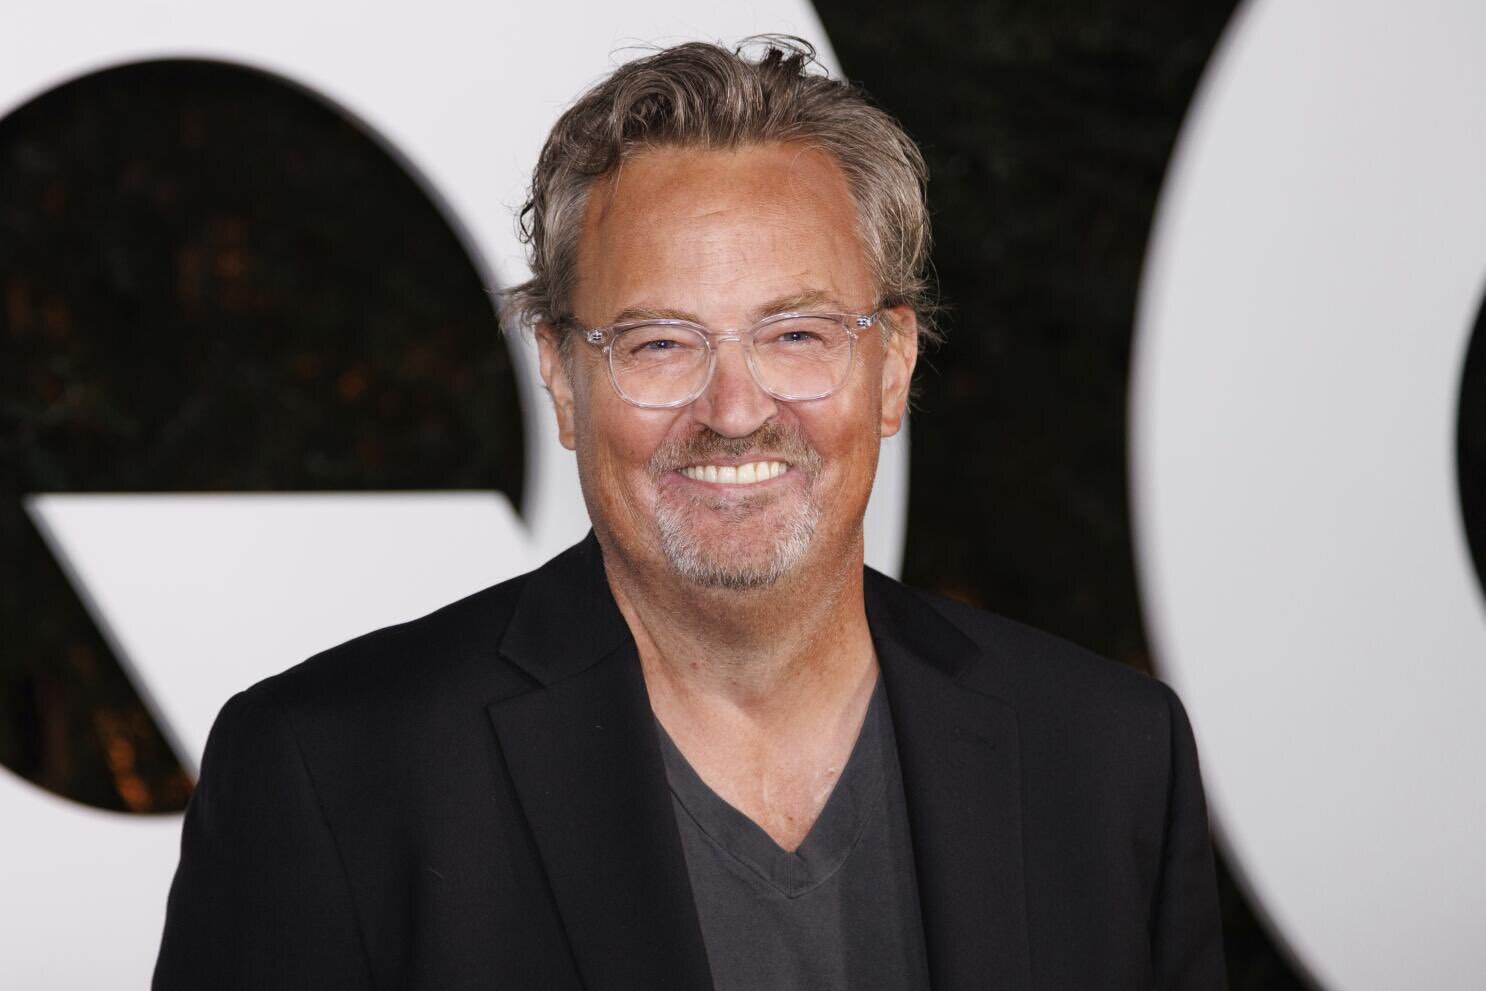 Matthew Perry (Chandler) death: FRIENDS fans in disbelief, tributes pour in | Watch reactions